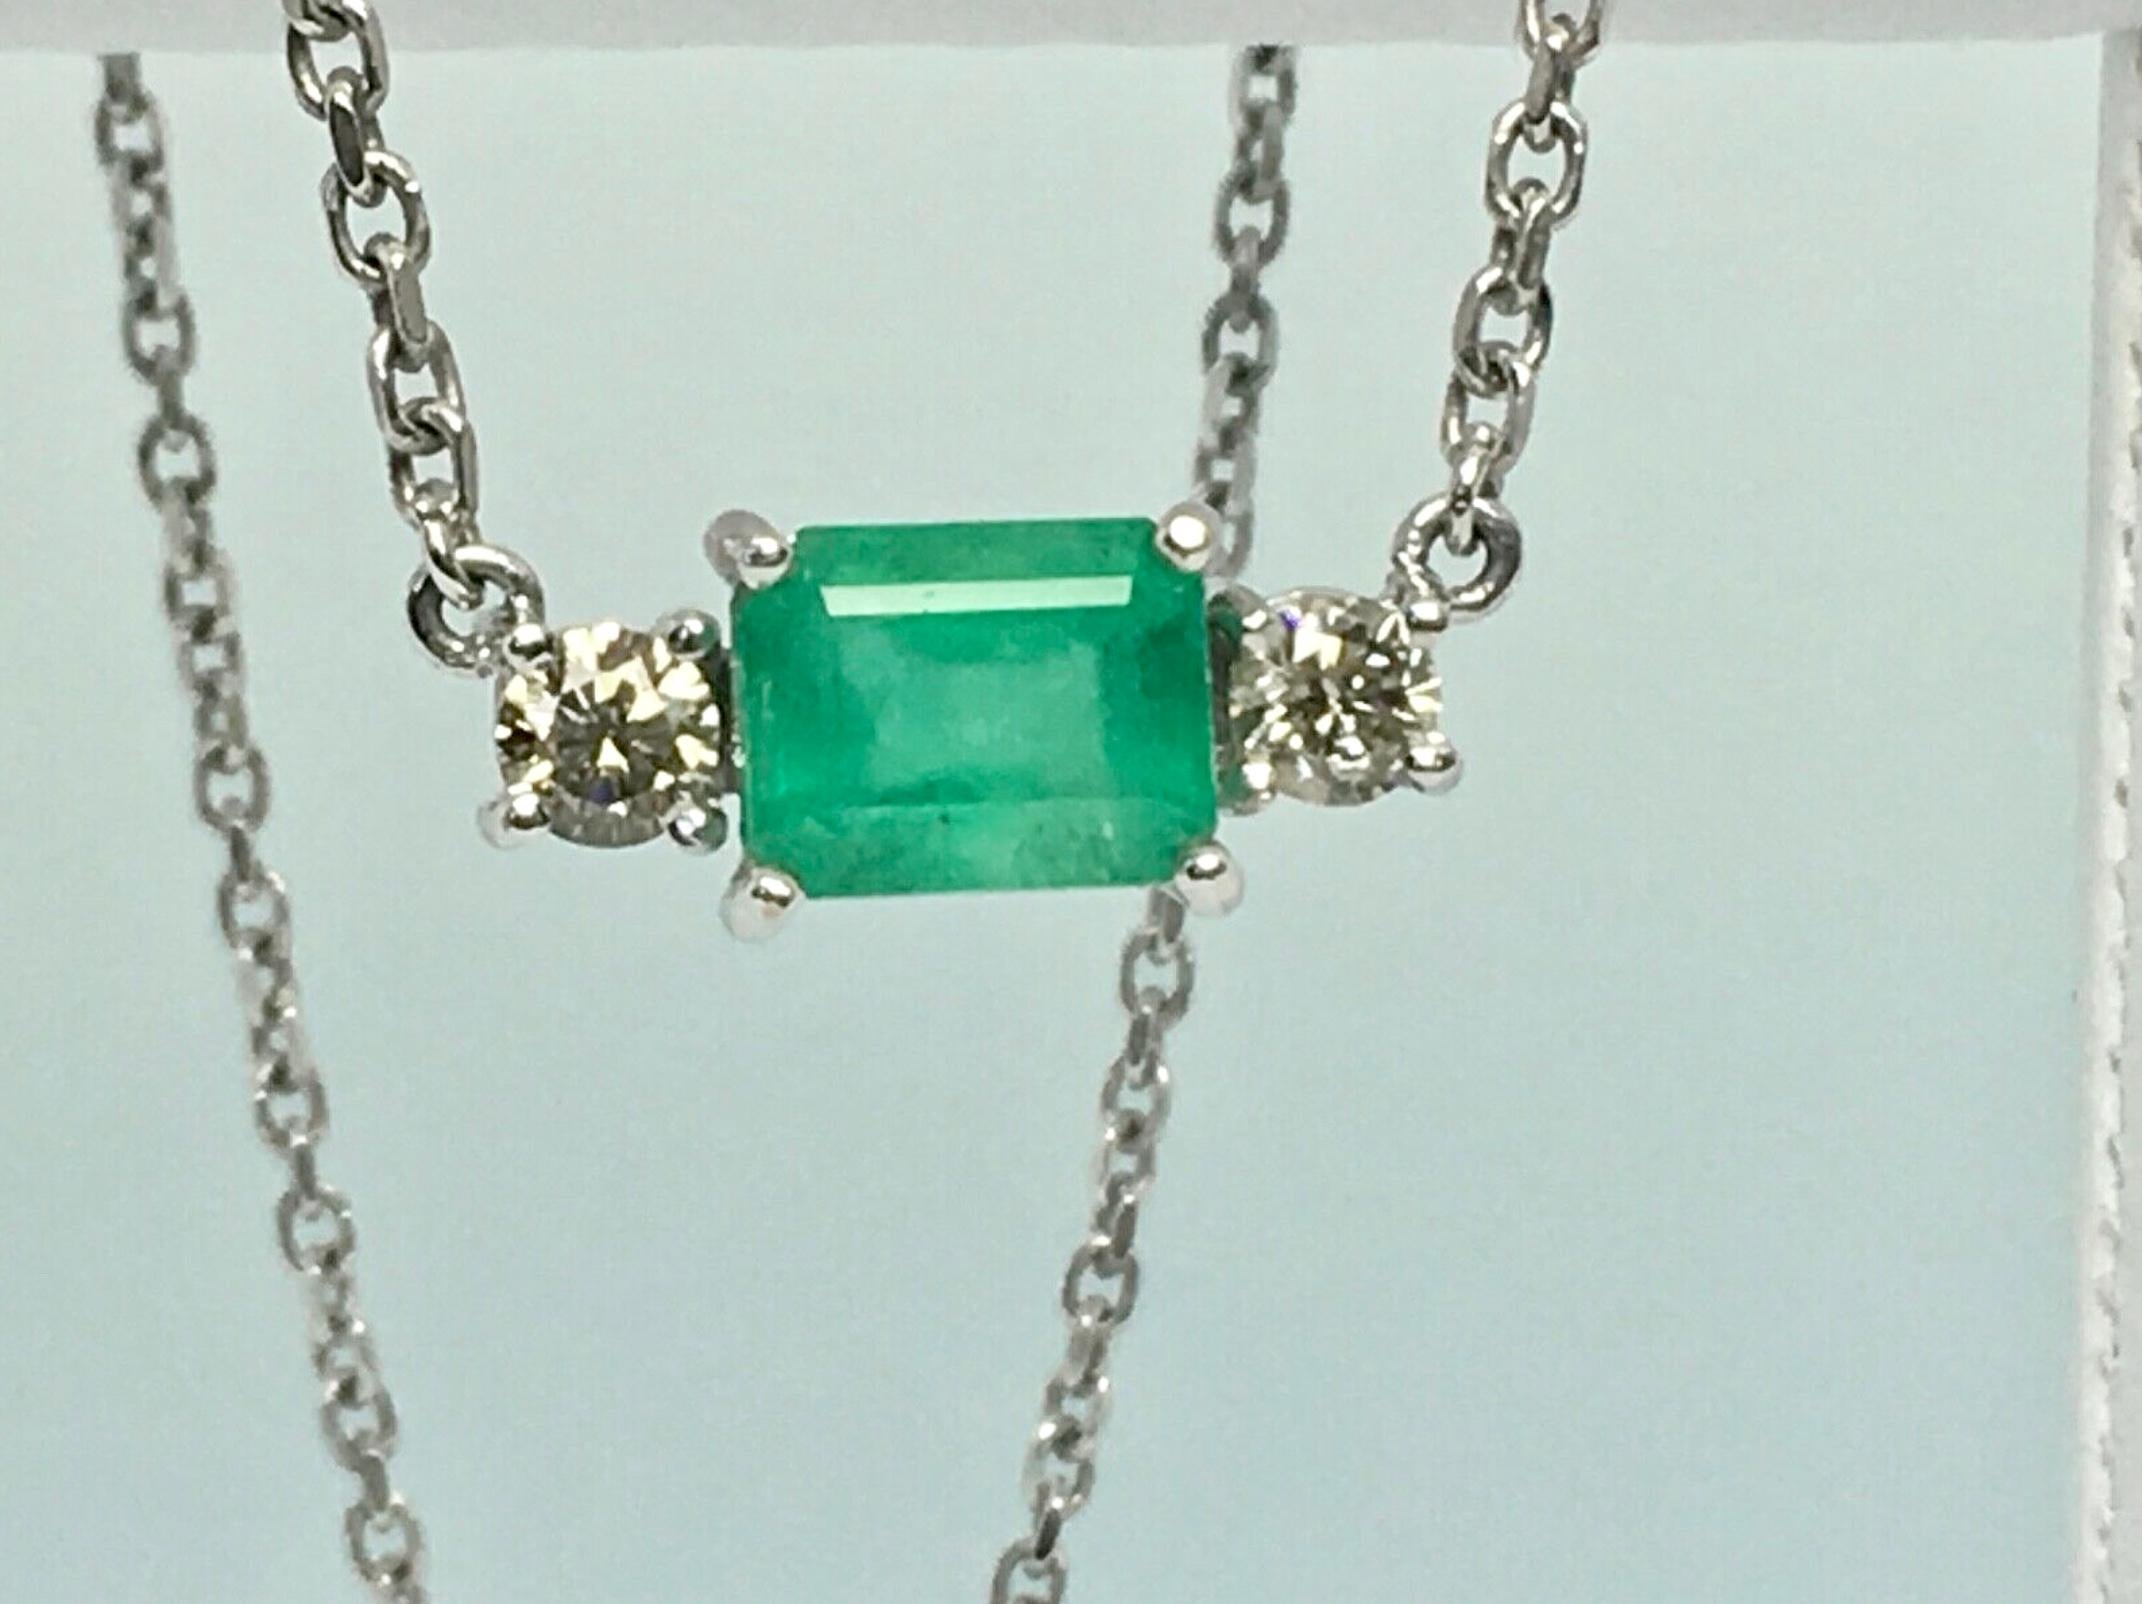 Natural Colombian Emerald Emerald Cut 2.50 Carat and Two Natural Diamond .60 Carat  SI1-SI2/ Light Champagne Color.
The Colombian emerald shows a nice medium green /Very good clarity & transparency.  
Mounting Is Custom Made of Solid 18K white Gold